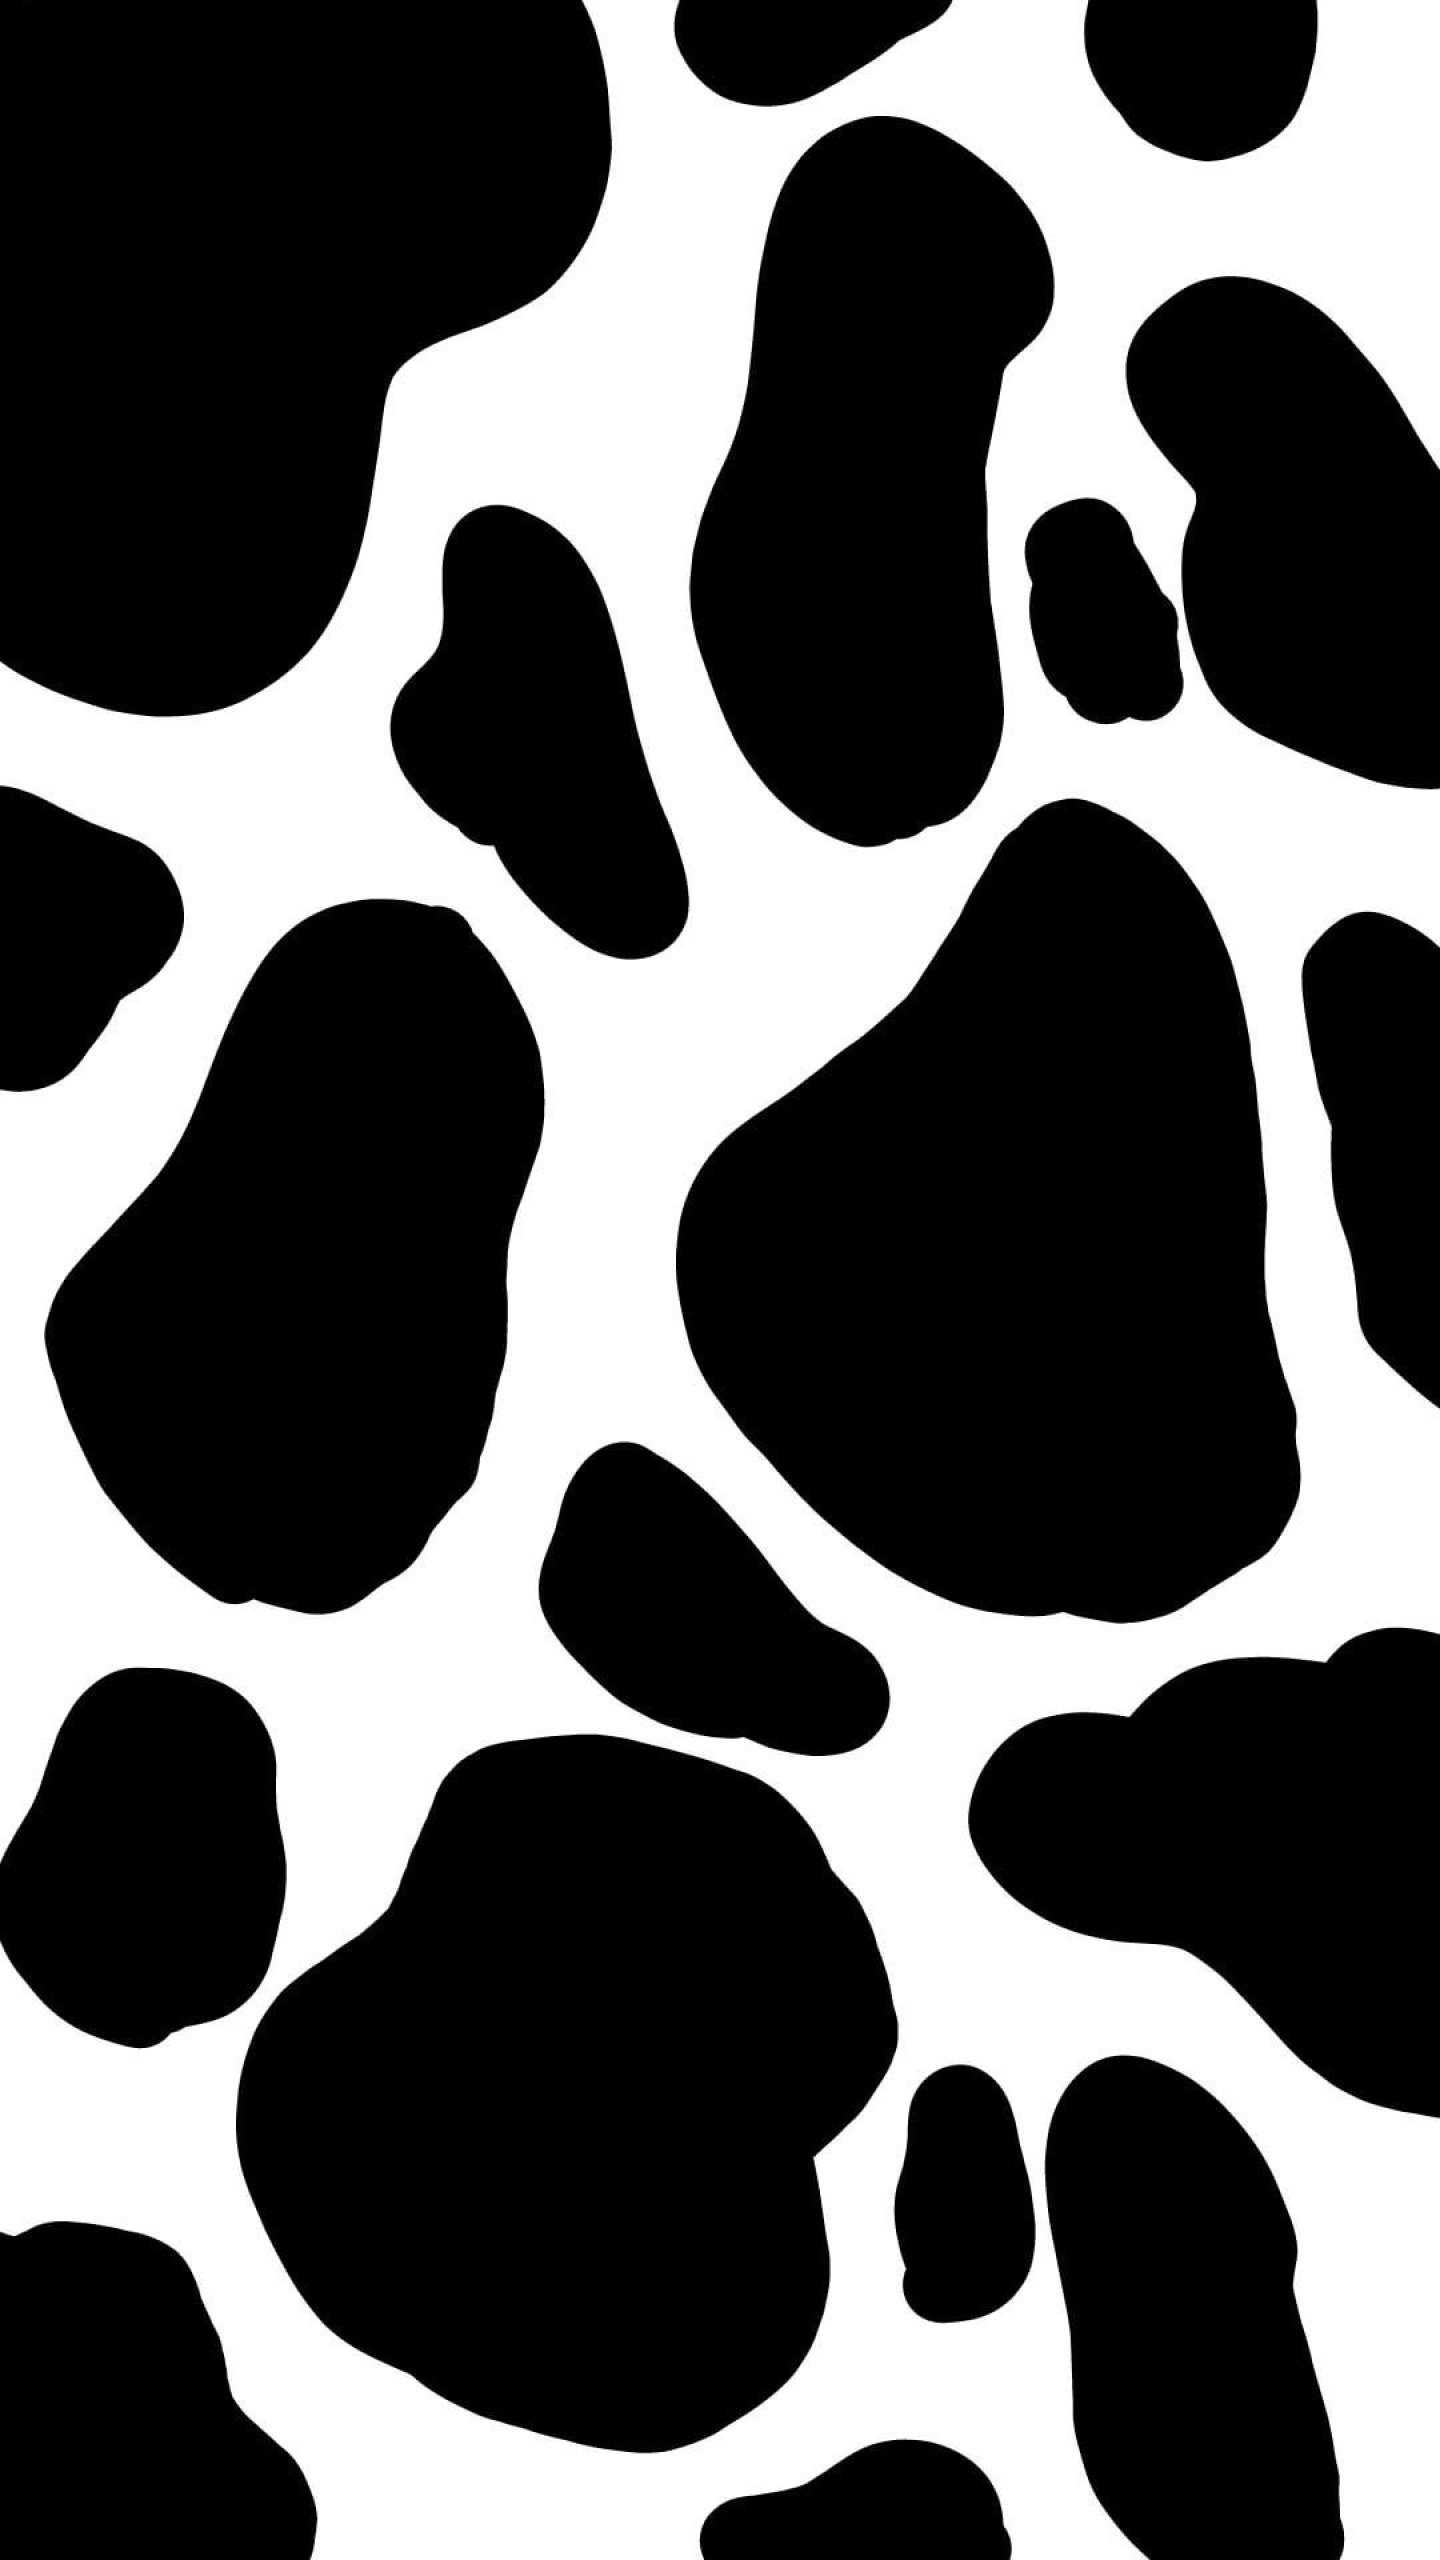 A cow pattern that is great for a phone background - Cow